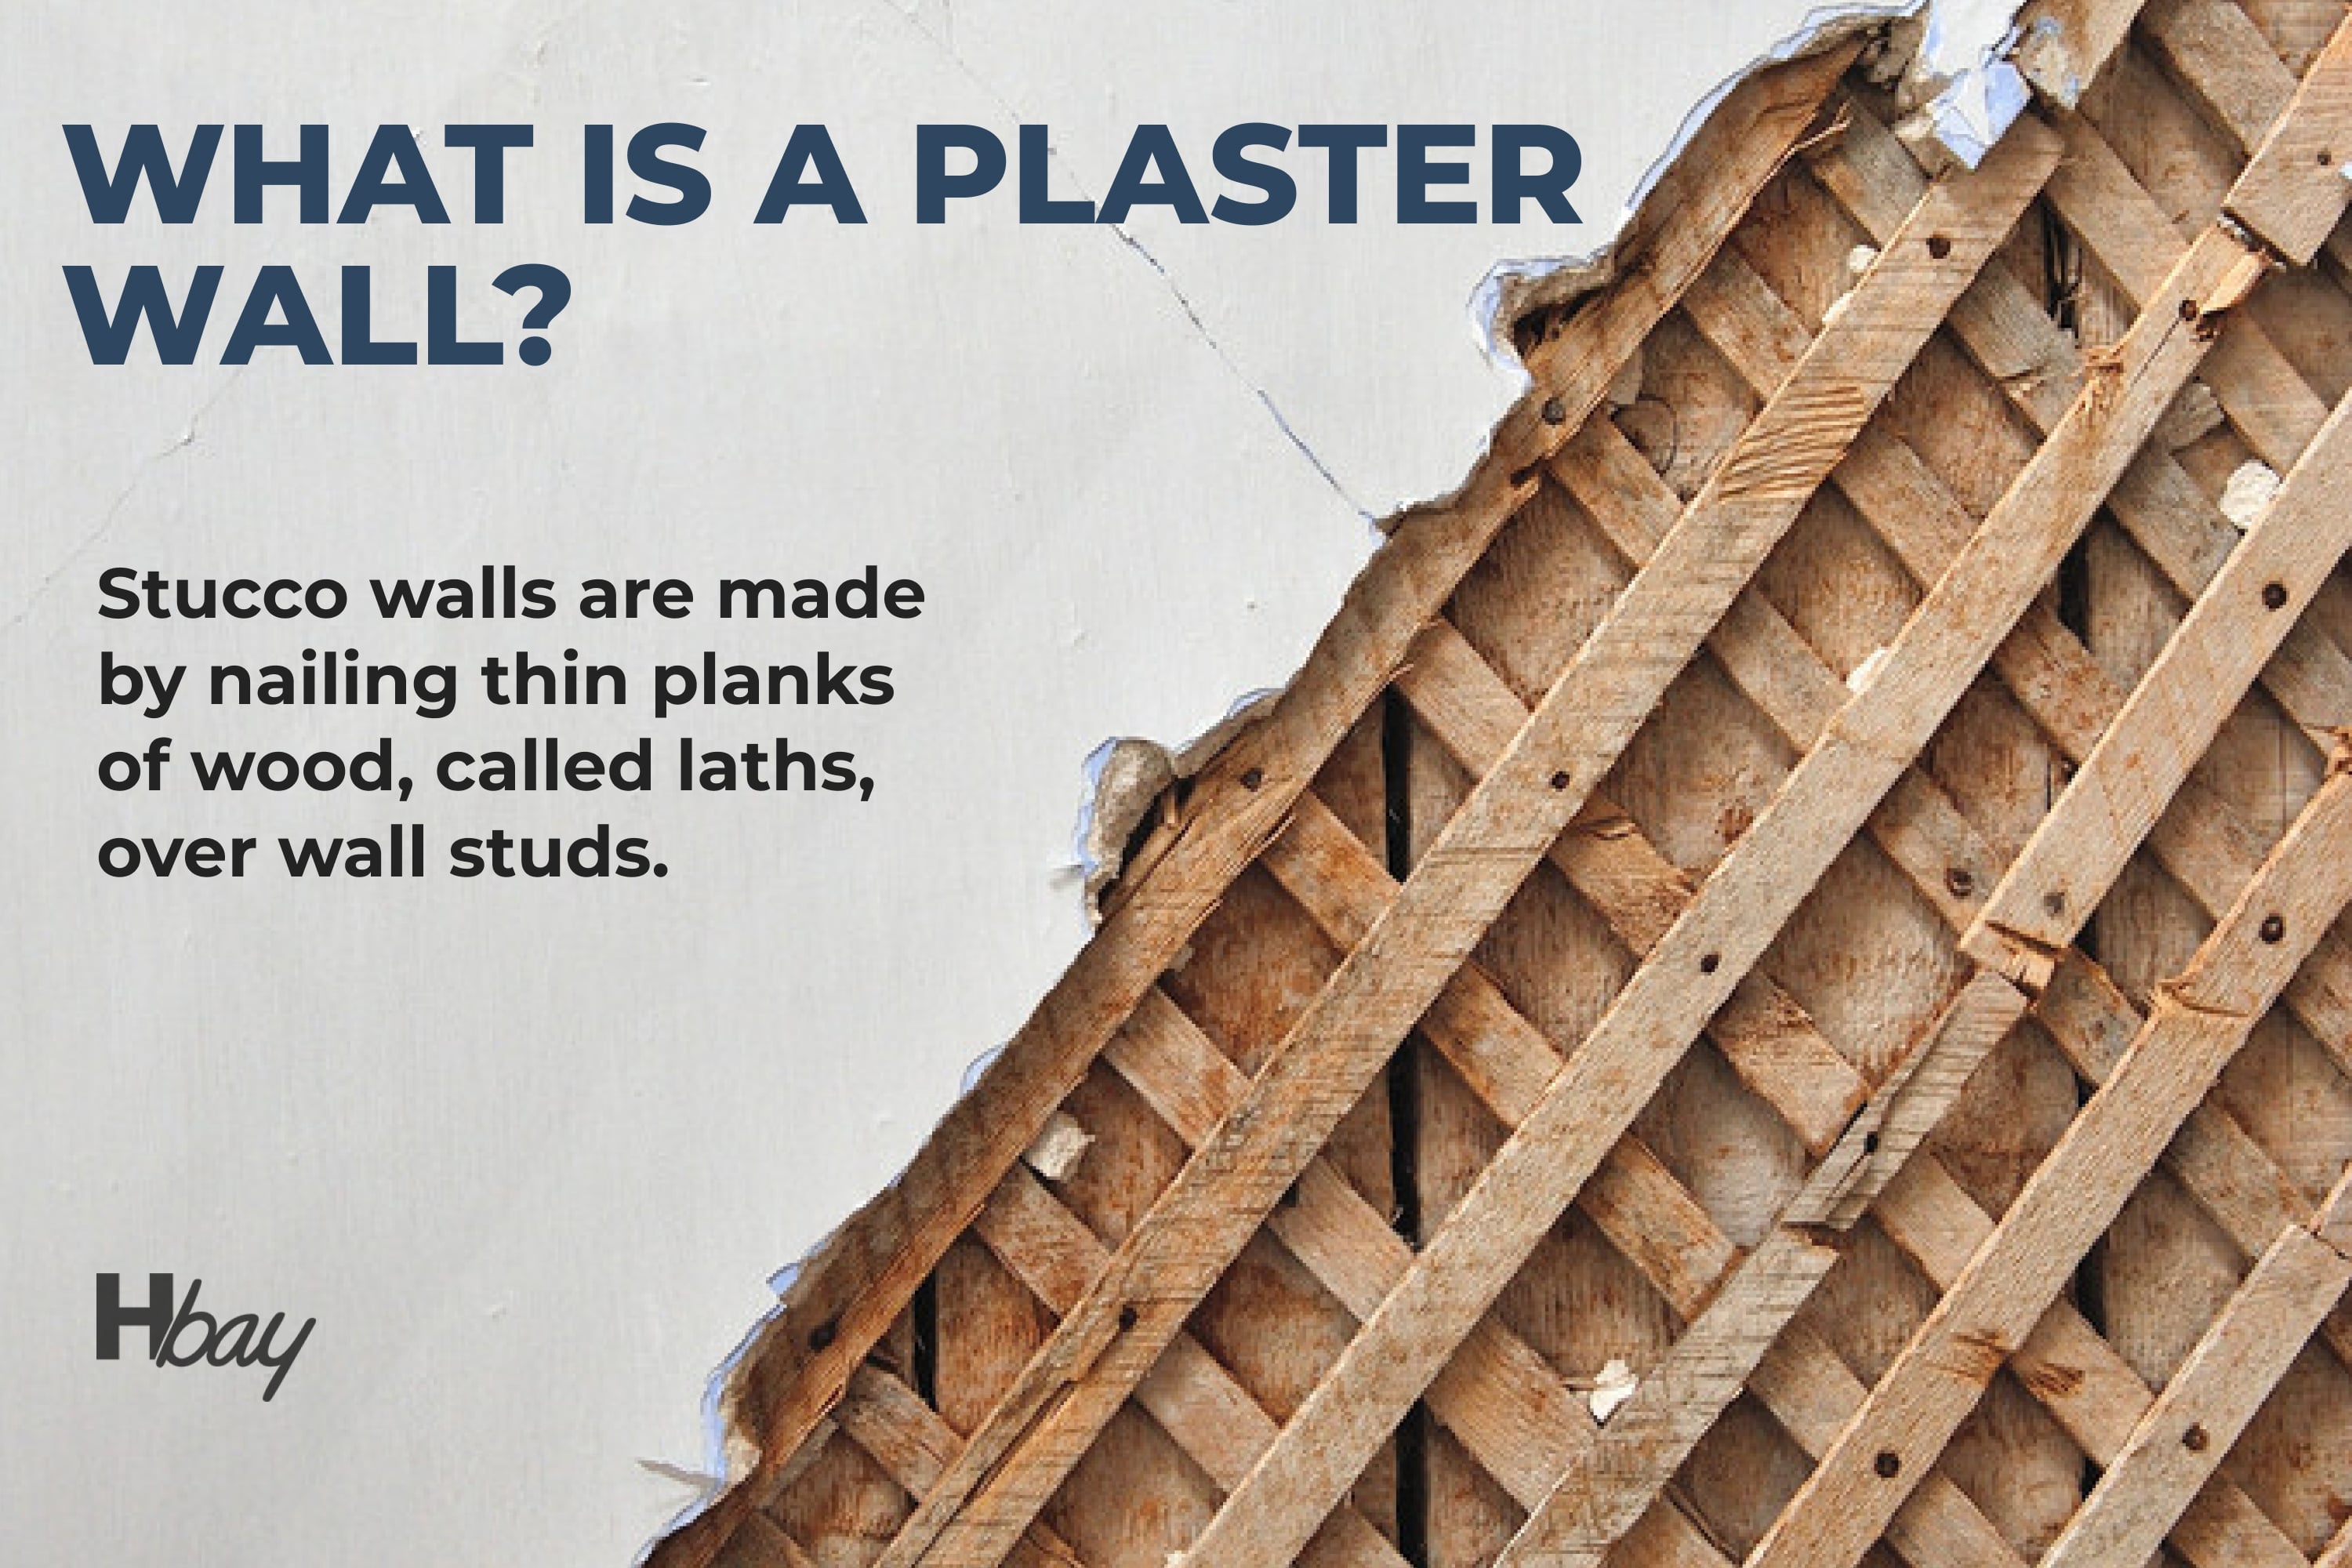 What is a plaster wall